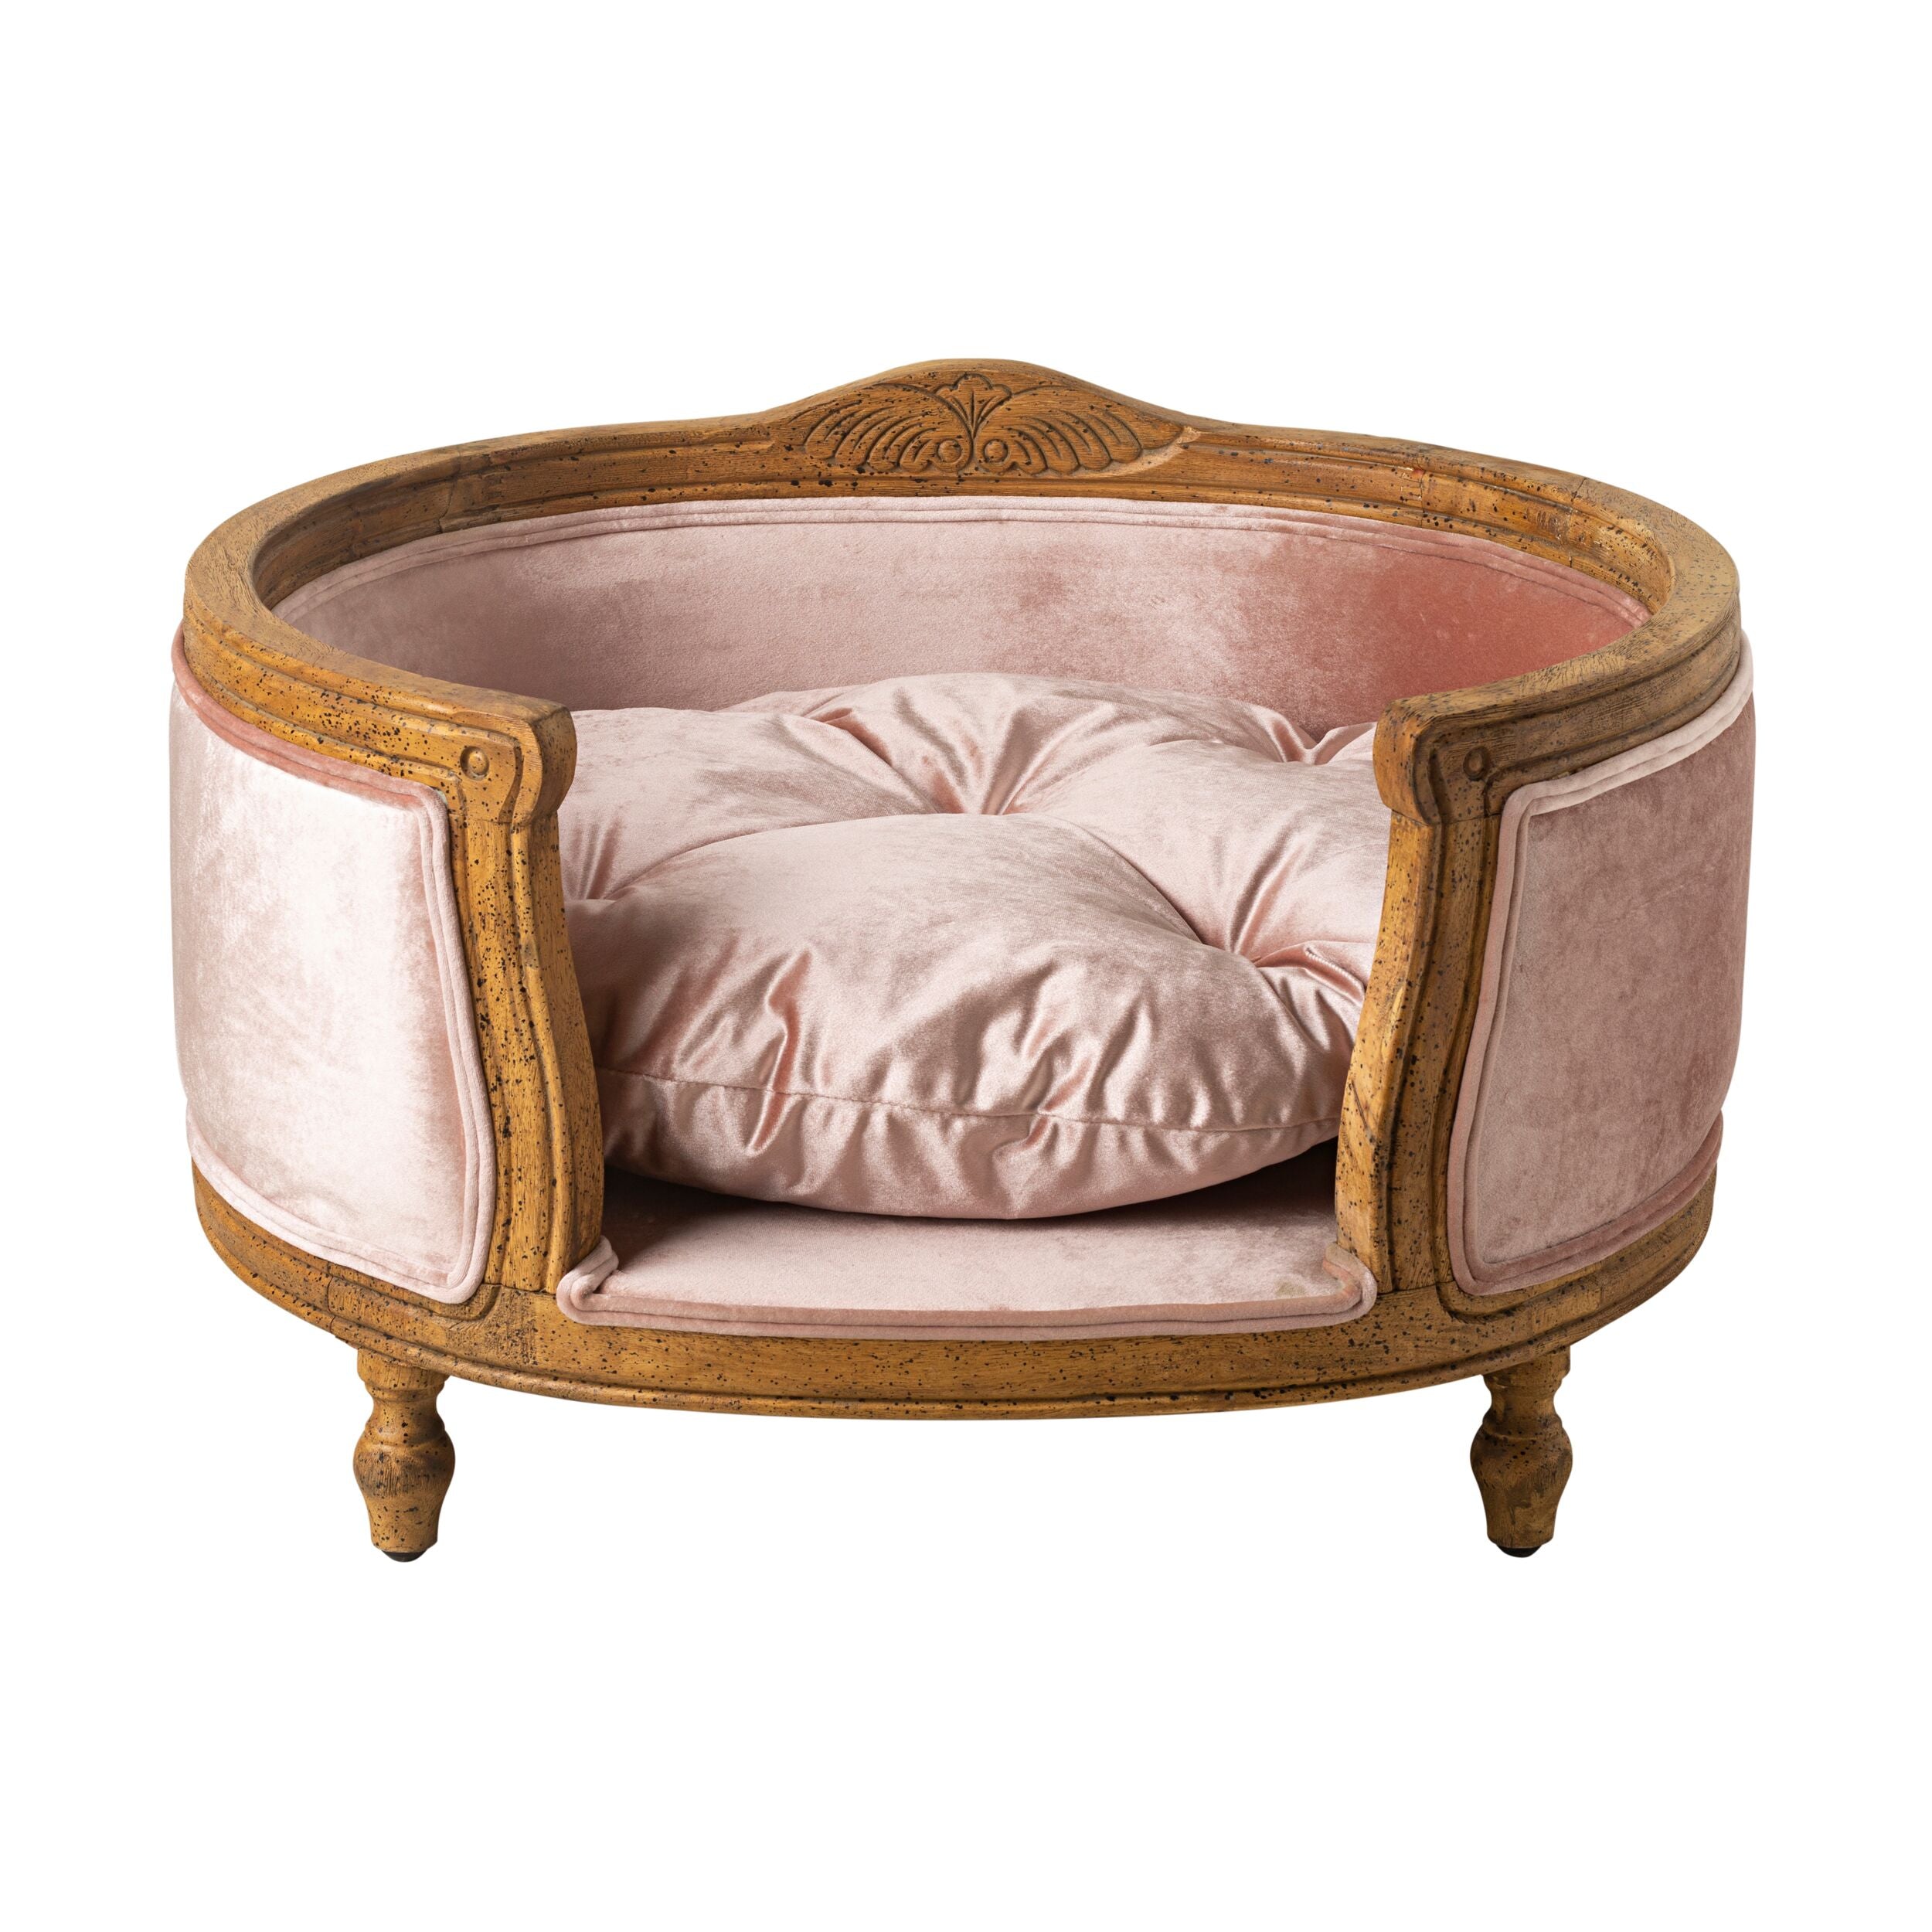 Luxe Dog Bed Blush Pink 75x70x44cm